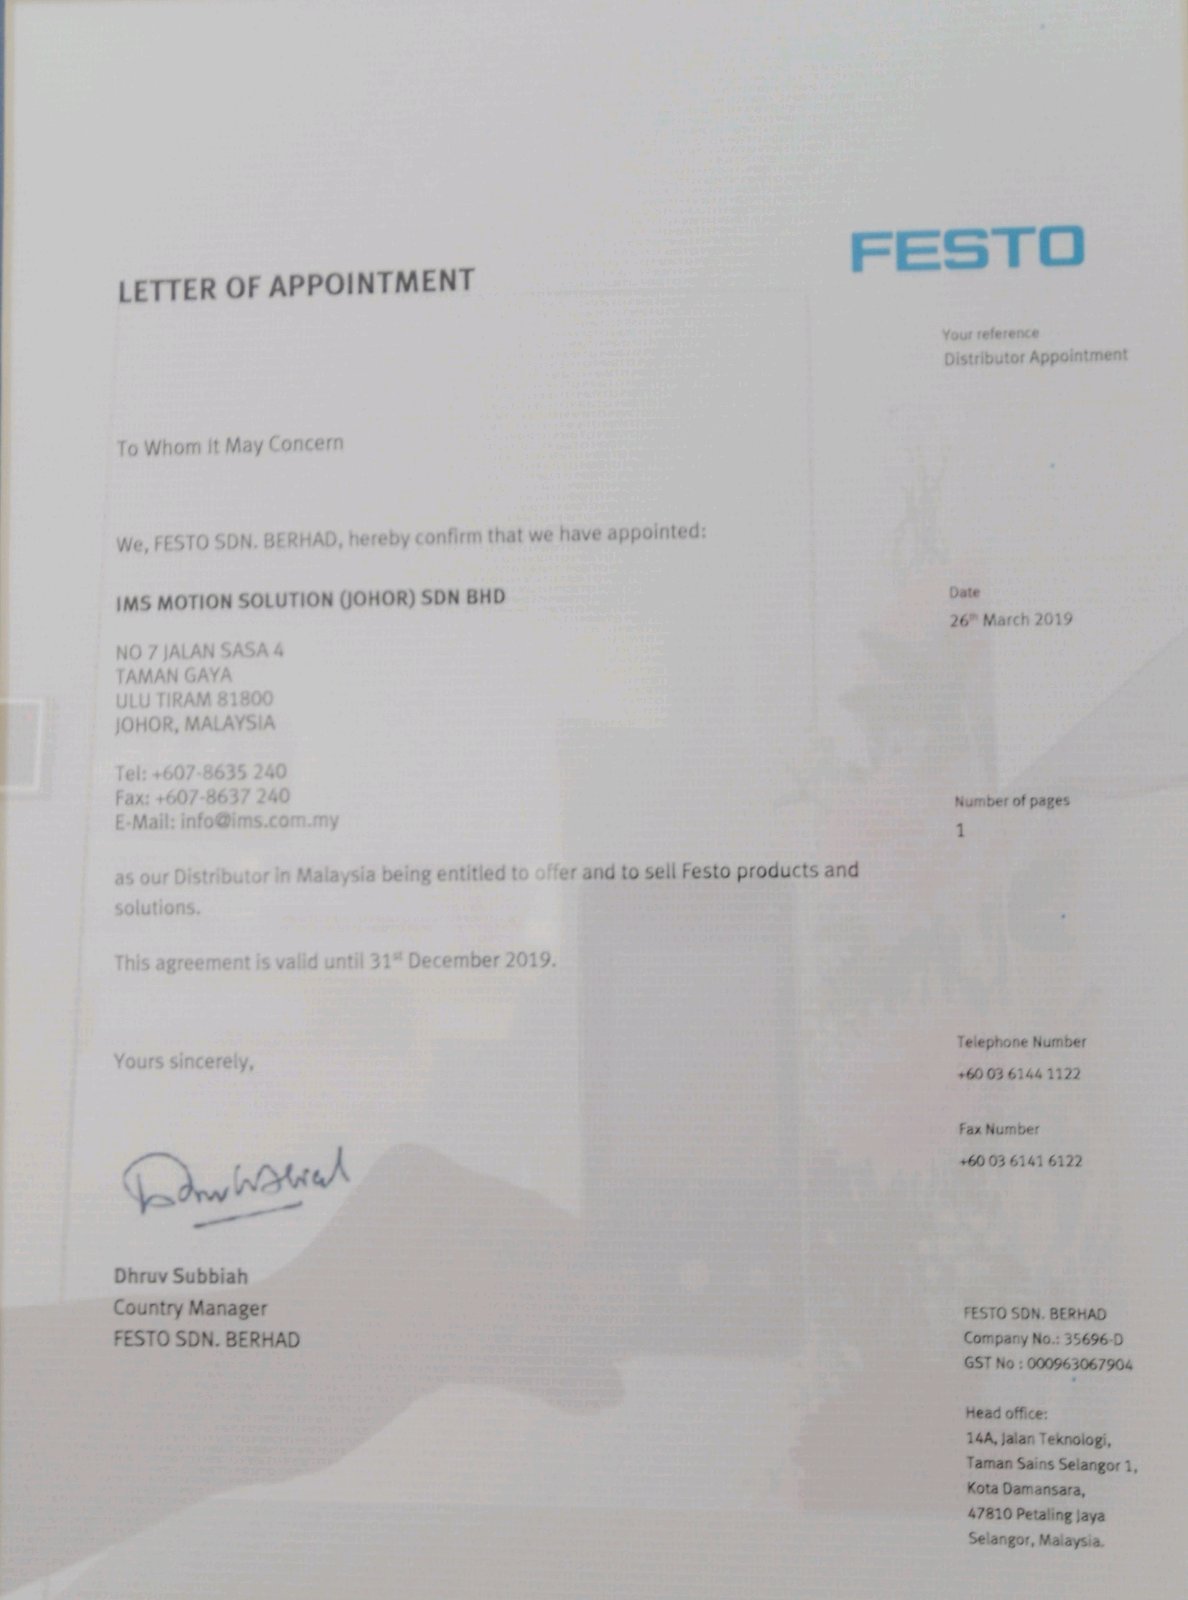 iMS appointed as FESTO Distributor